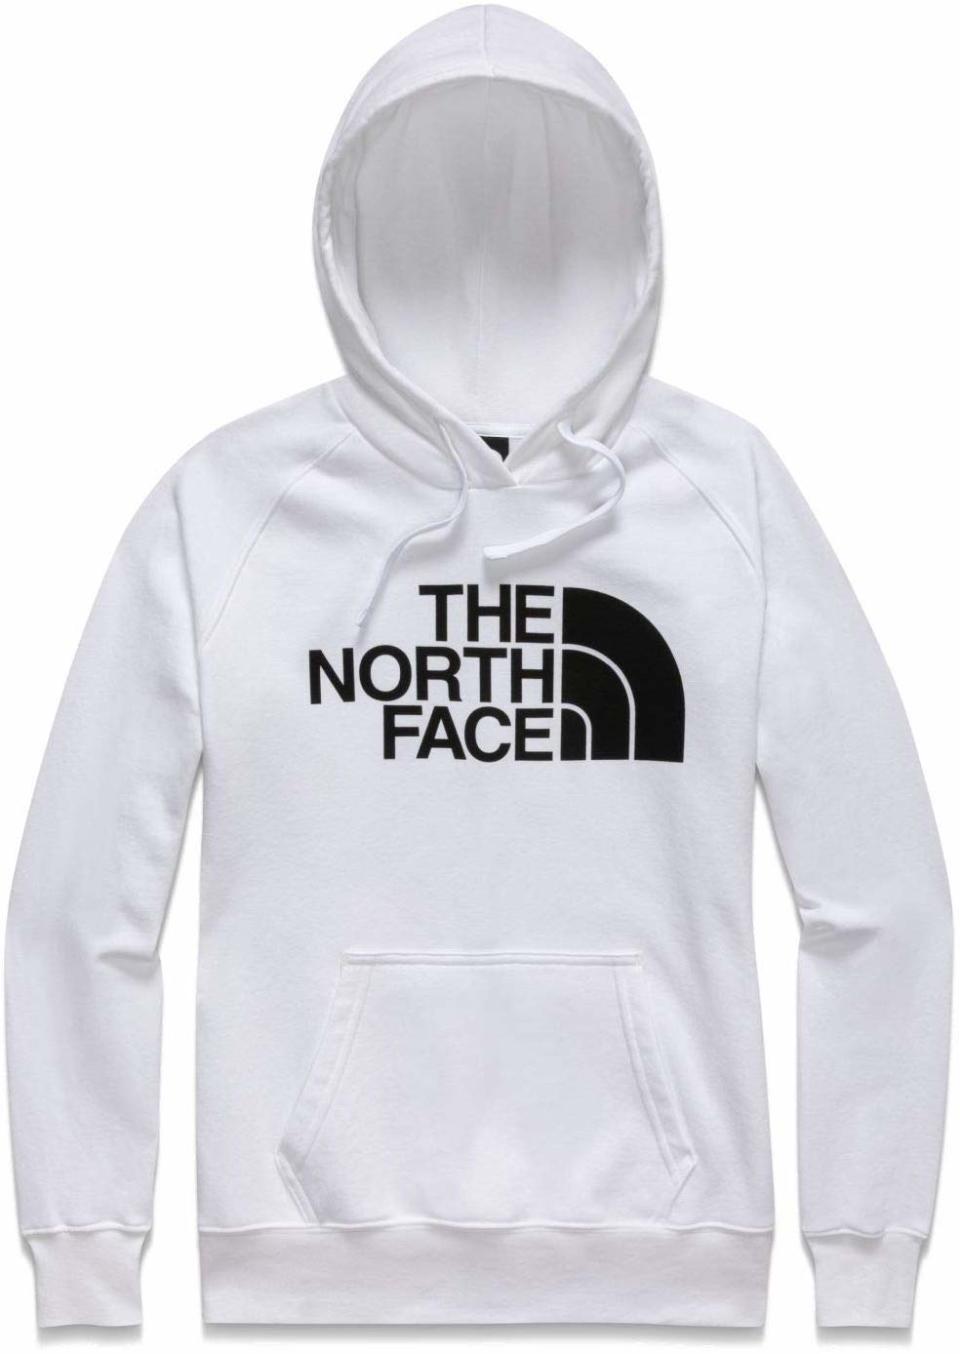 North Face women's hoodie